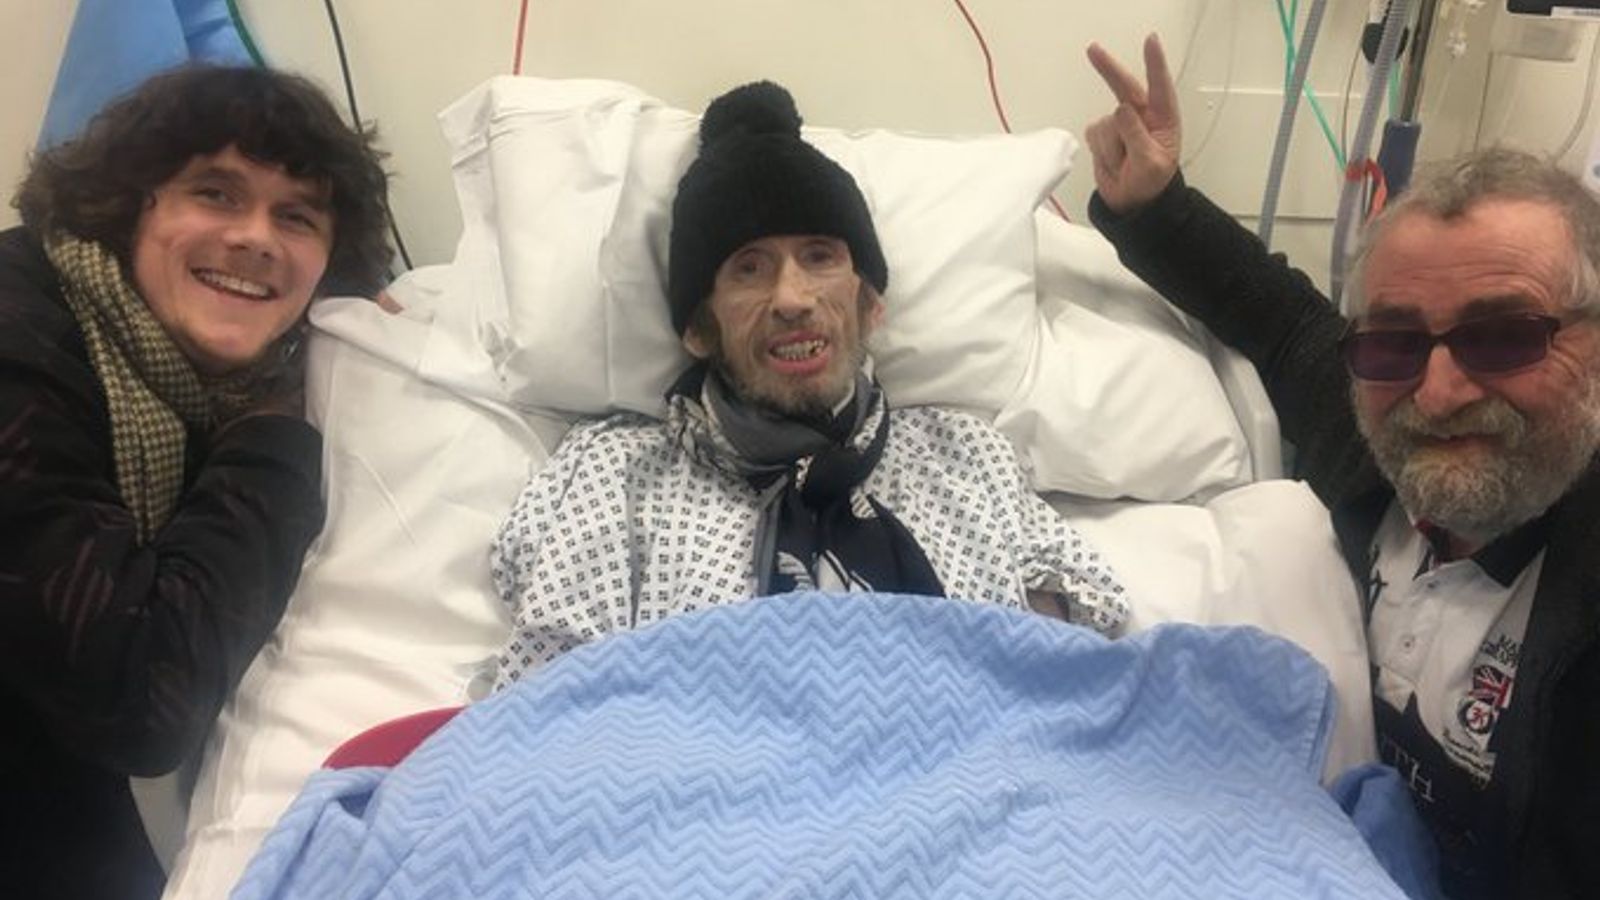 Shane MacGowan's wife says The Pogues frontman is 'out of hospital'